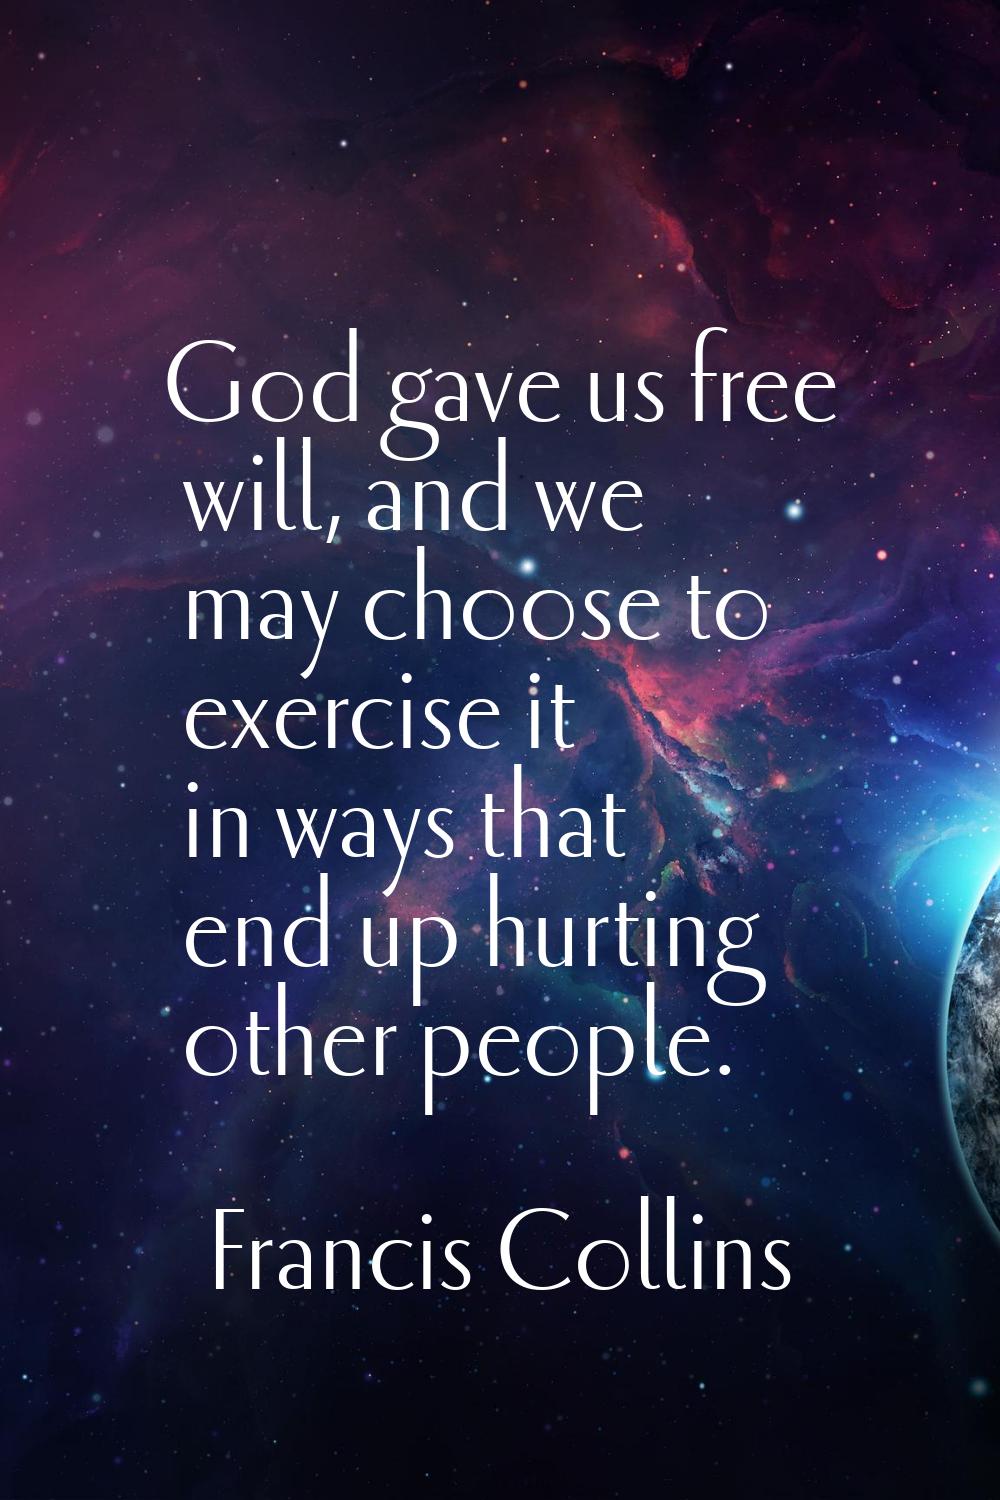 God gave us free will, and we may choose to exercise it in ways that end up hurting other people.